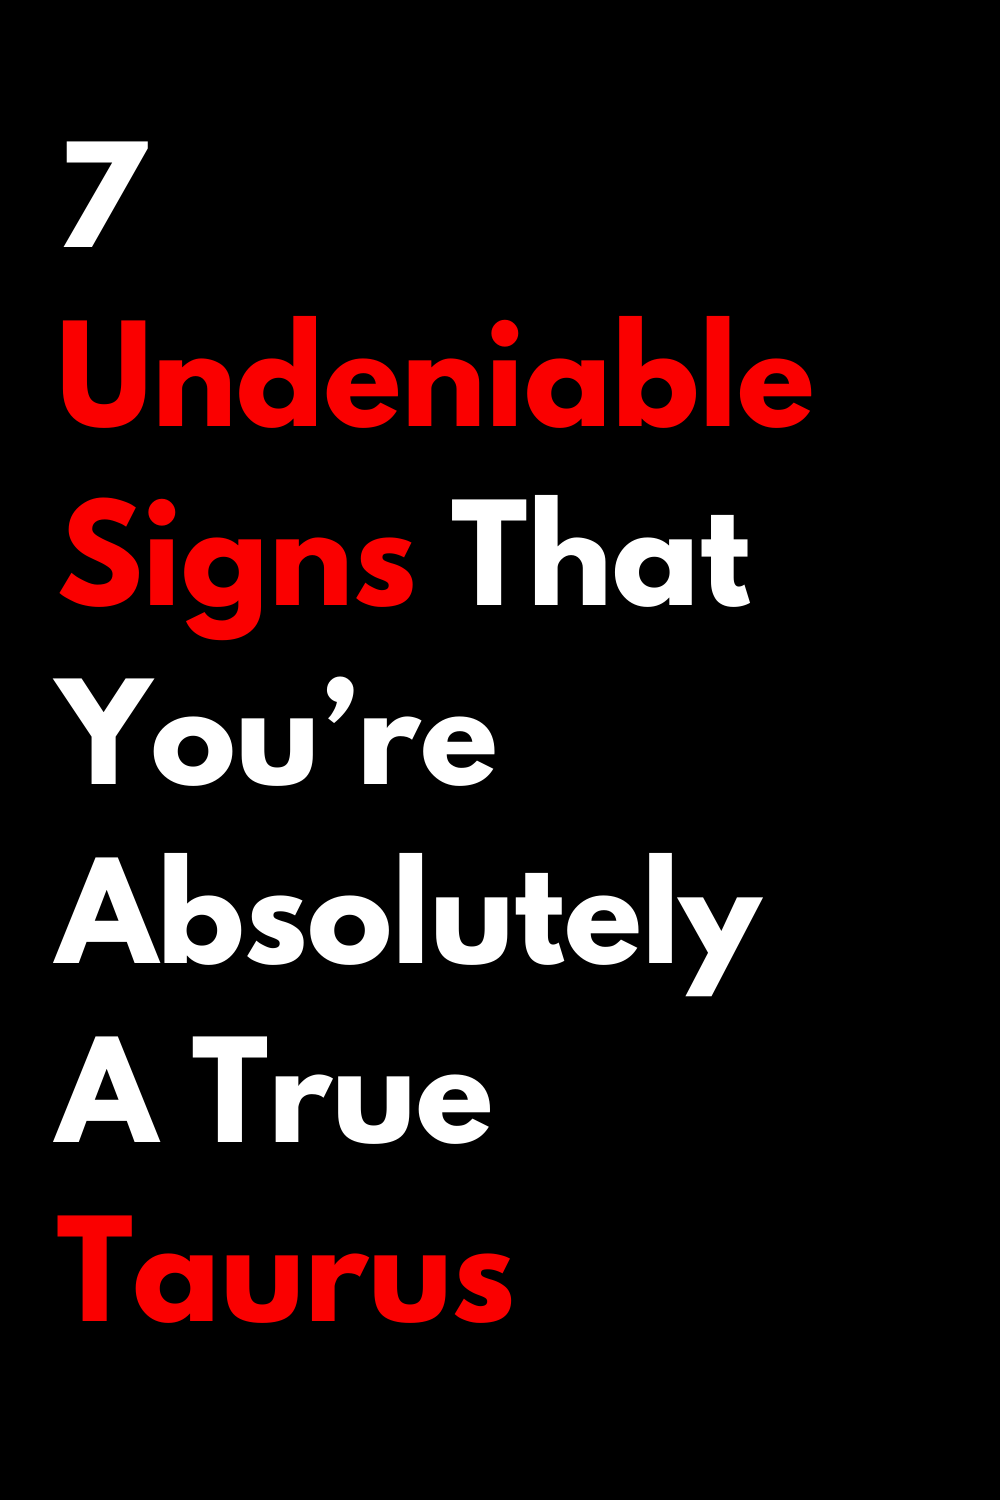 7 Undeniable Signs That You’re Absolutely A True Taurus